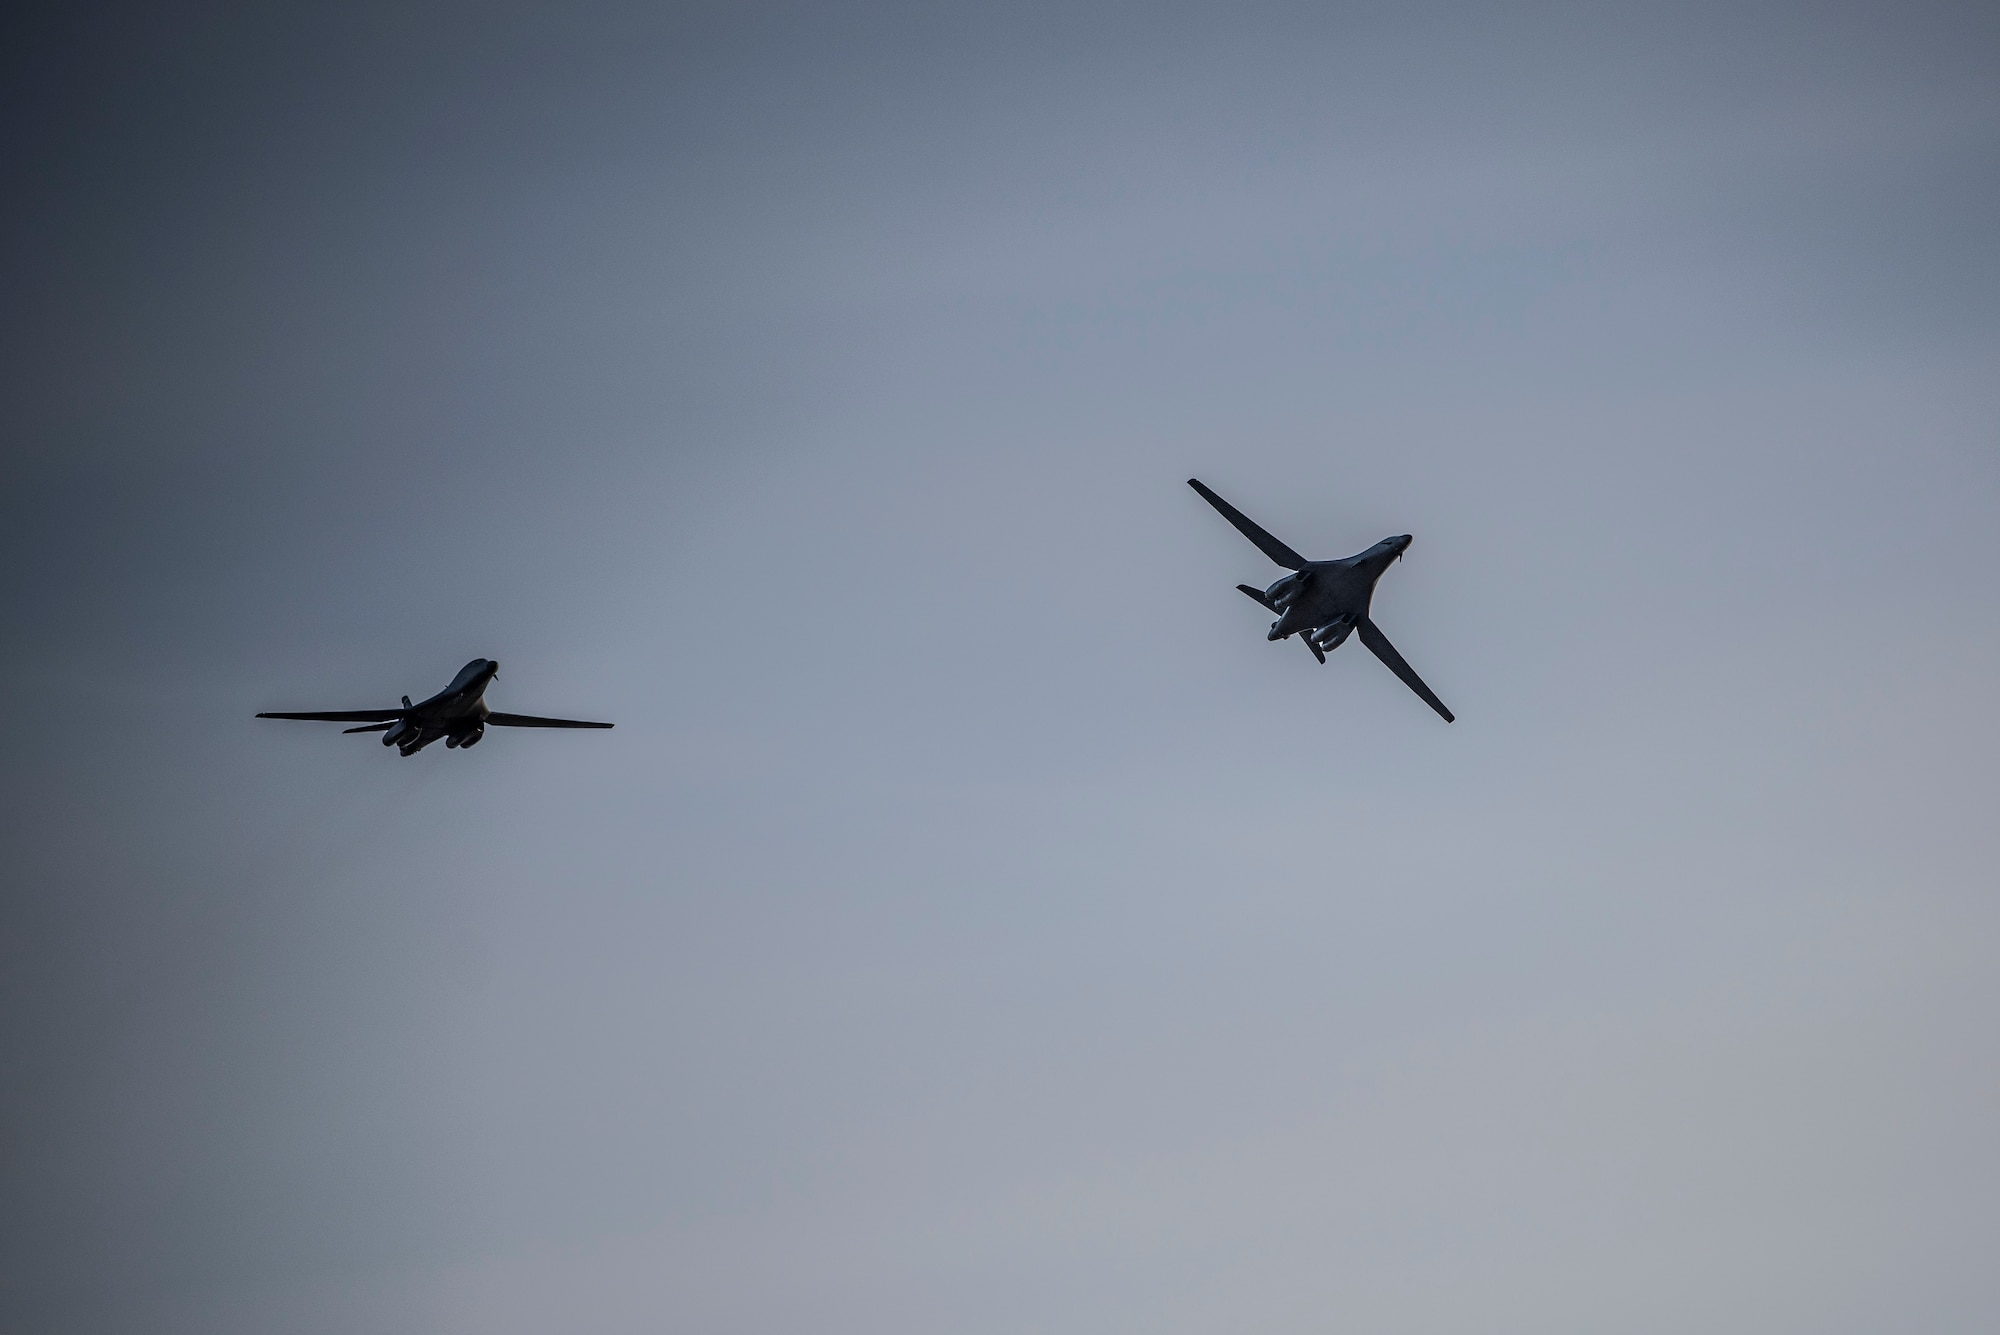 Two B-1B Lancers assigned to the 9th Expeditionary Bomb Squadron fly above Ørland Air Force Station, Norway, March 14, 2021. The 9th EBS participated in Bomber Task Force training missions that provided aircrew the opportunity to train and work with U.S. allies and partners in joint and coalition operations and exercises. (U.S. Air Force photo by Airman 1st Class Colin Hollowell)